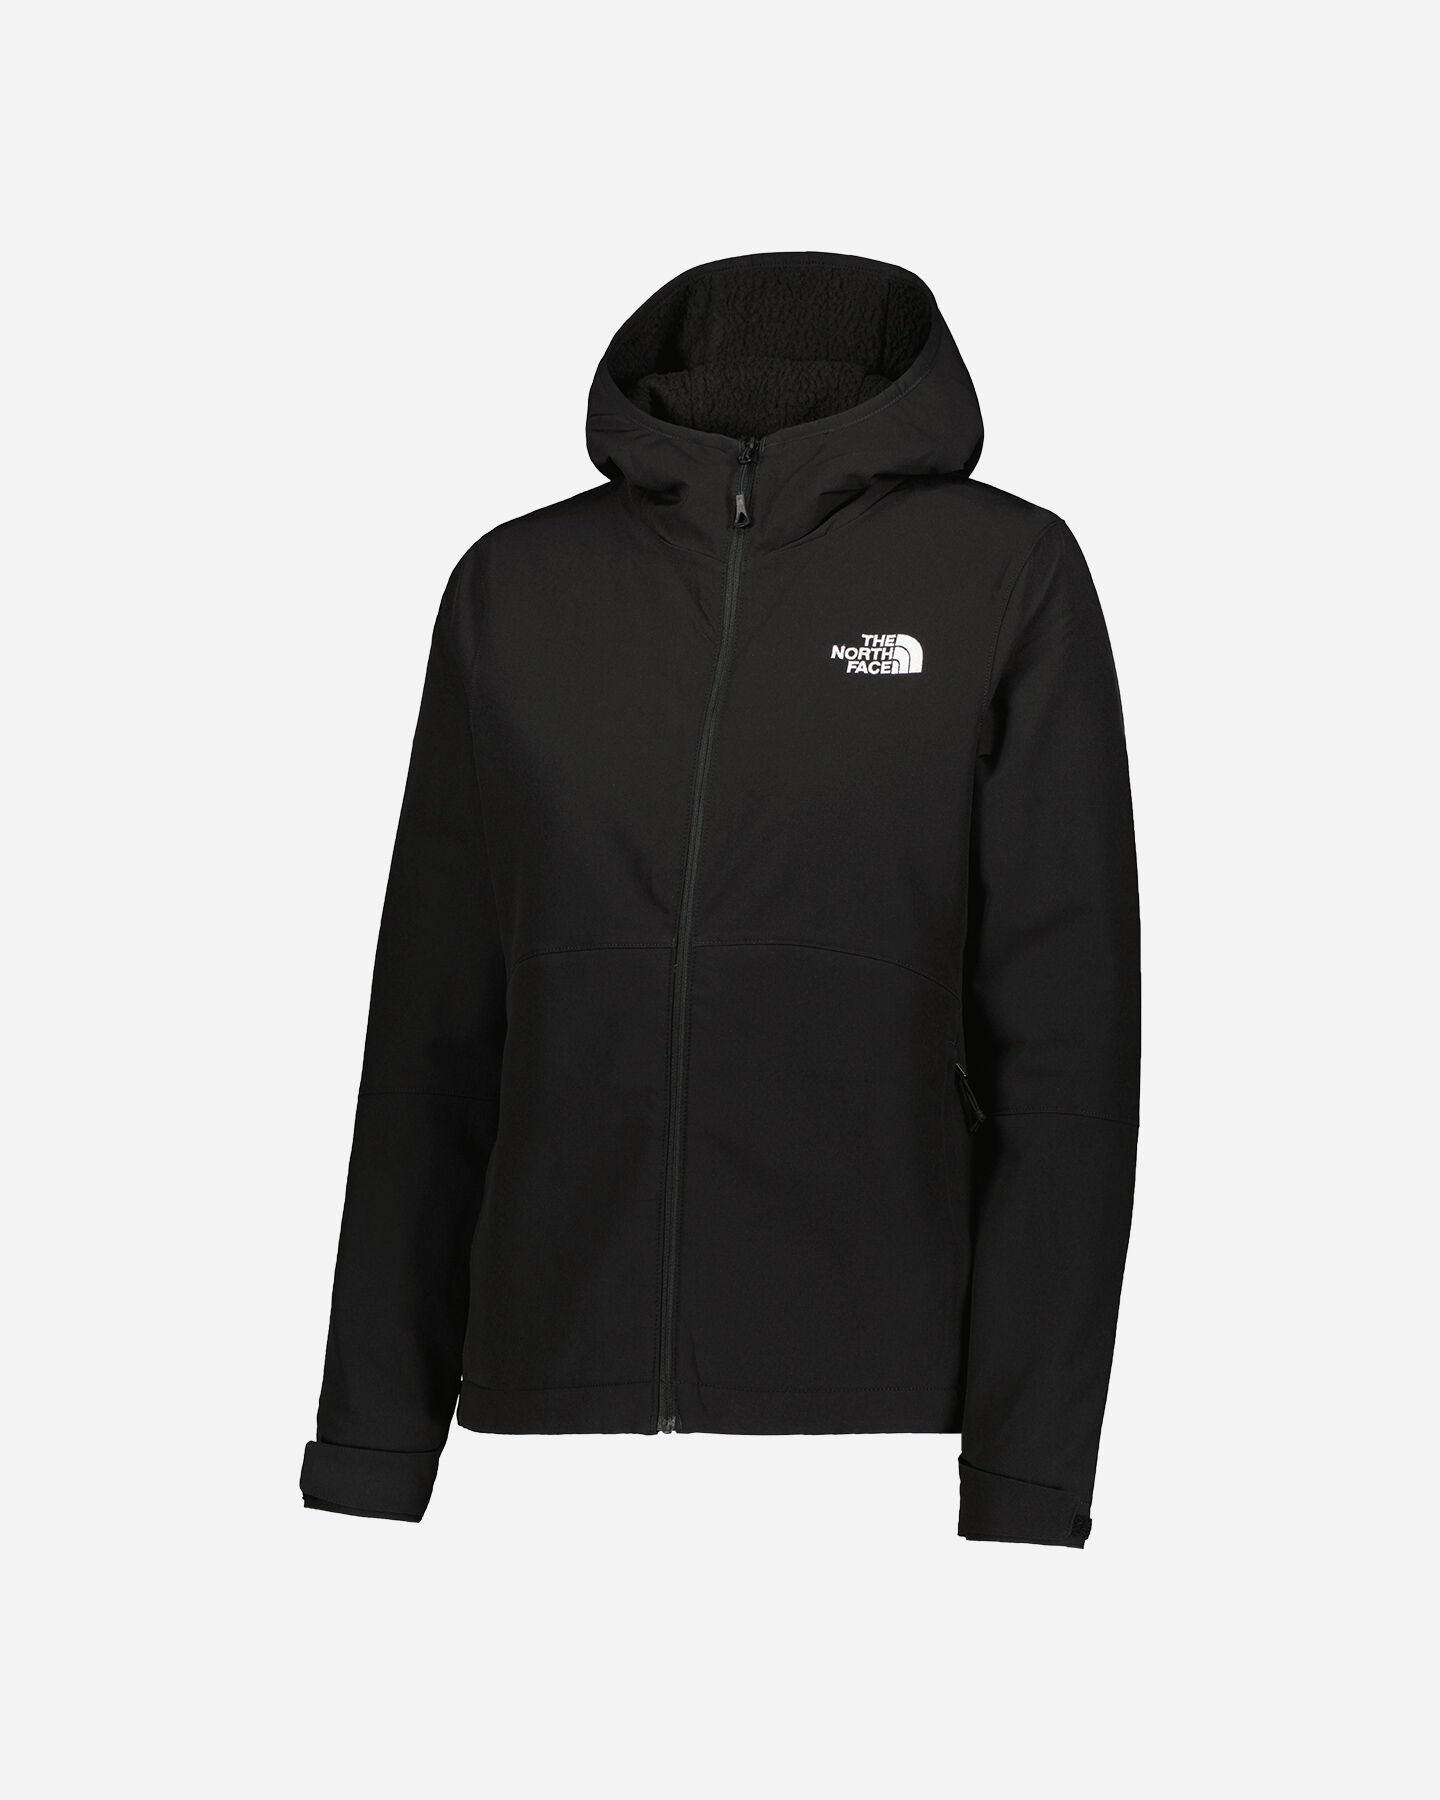  Pile THE NORTH FACE SOFTSHELL W S5477962|JK3|S scatto 0